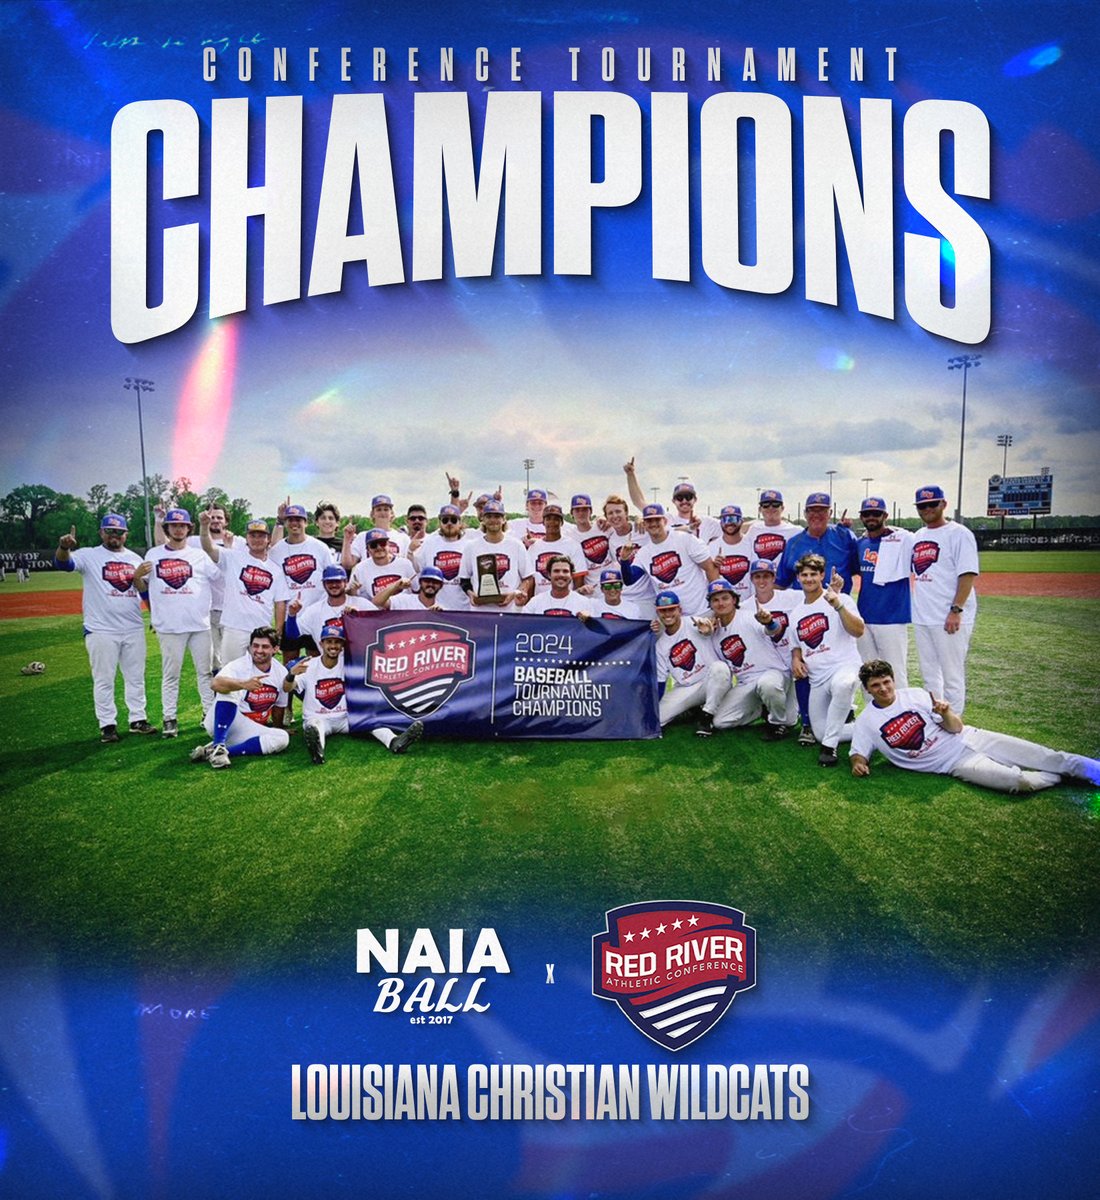 🚨 Congratulations to Louisiana Christian (31-19) on winning the Red River Athletic Conference Tournament! The Wildcats clinch an automatic qualifier to their first NAIA Opening Round since 1987! #NAIABall @LCU_Wildcats @LCU_bsb @RRACsports